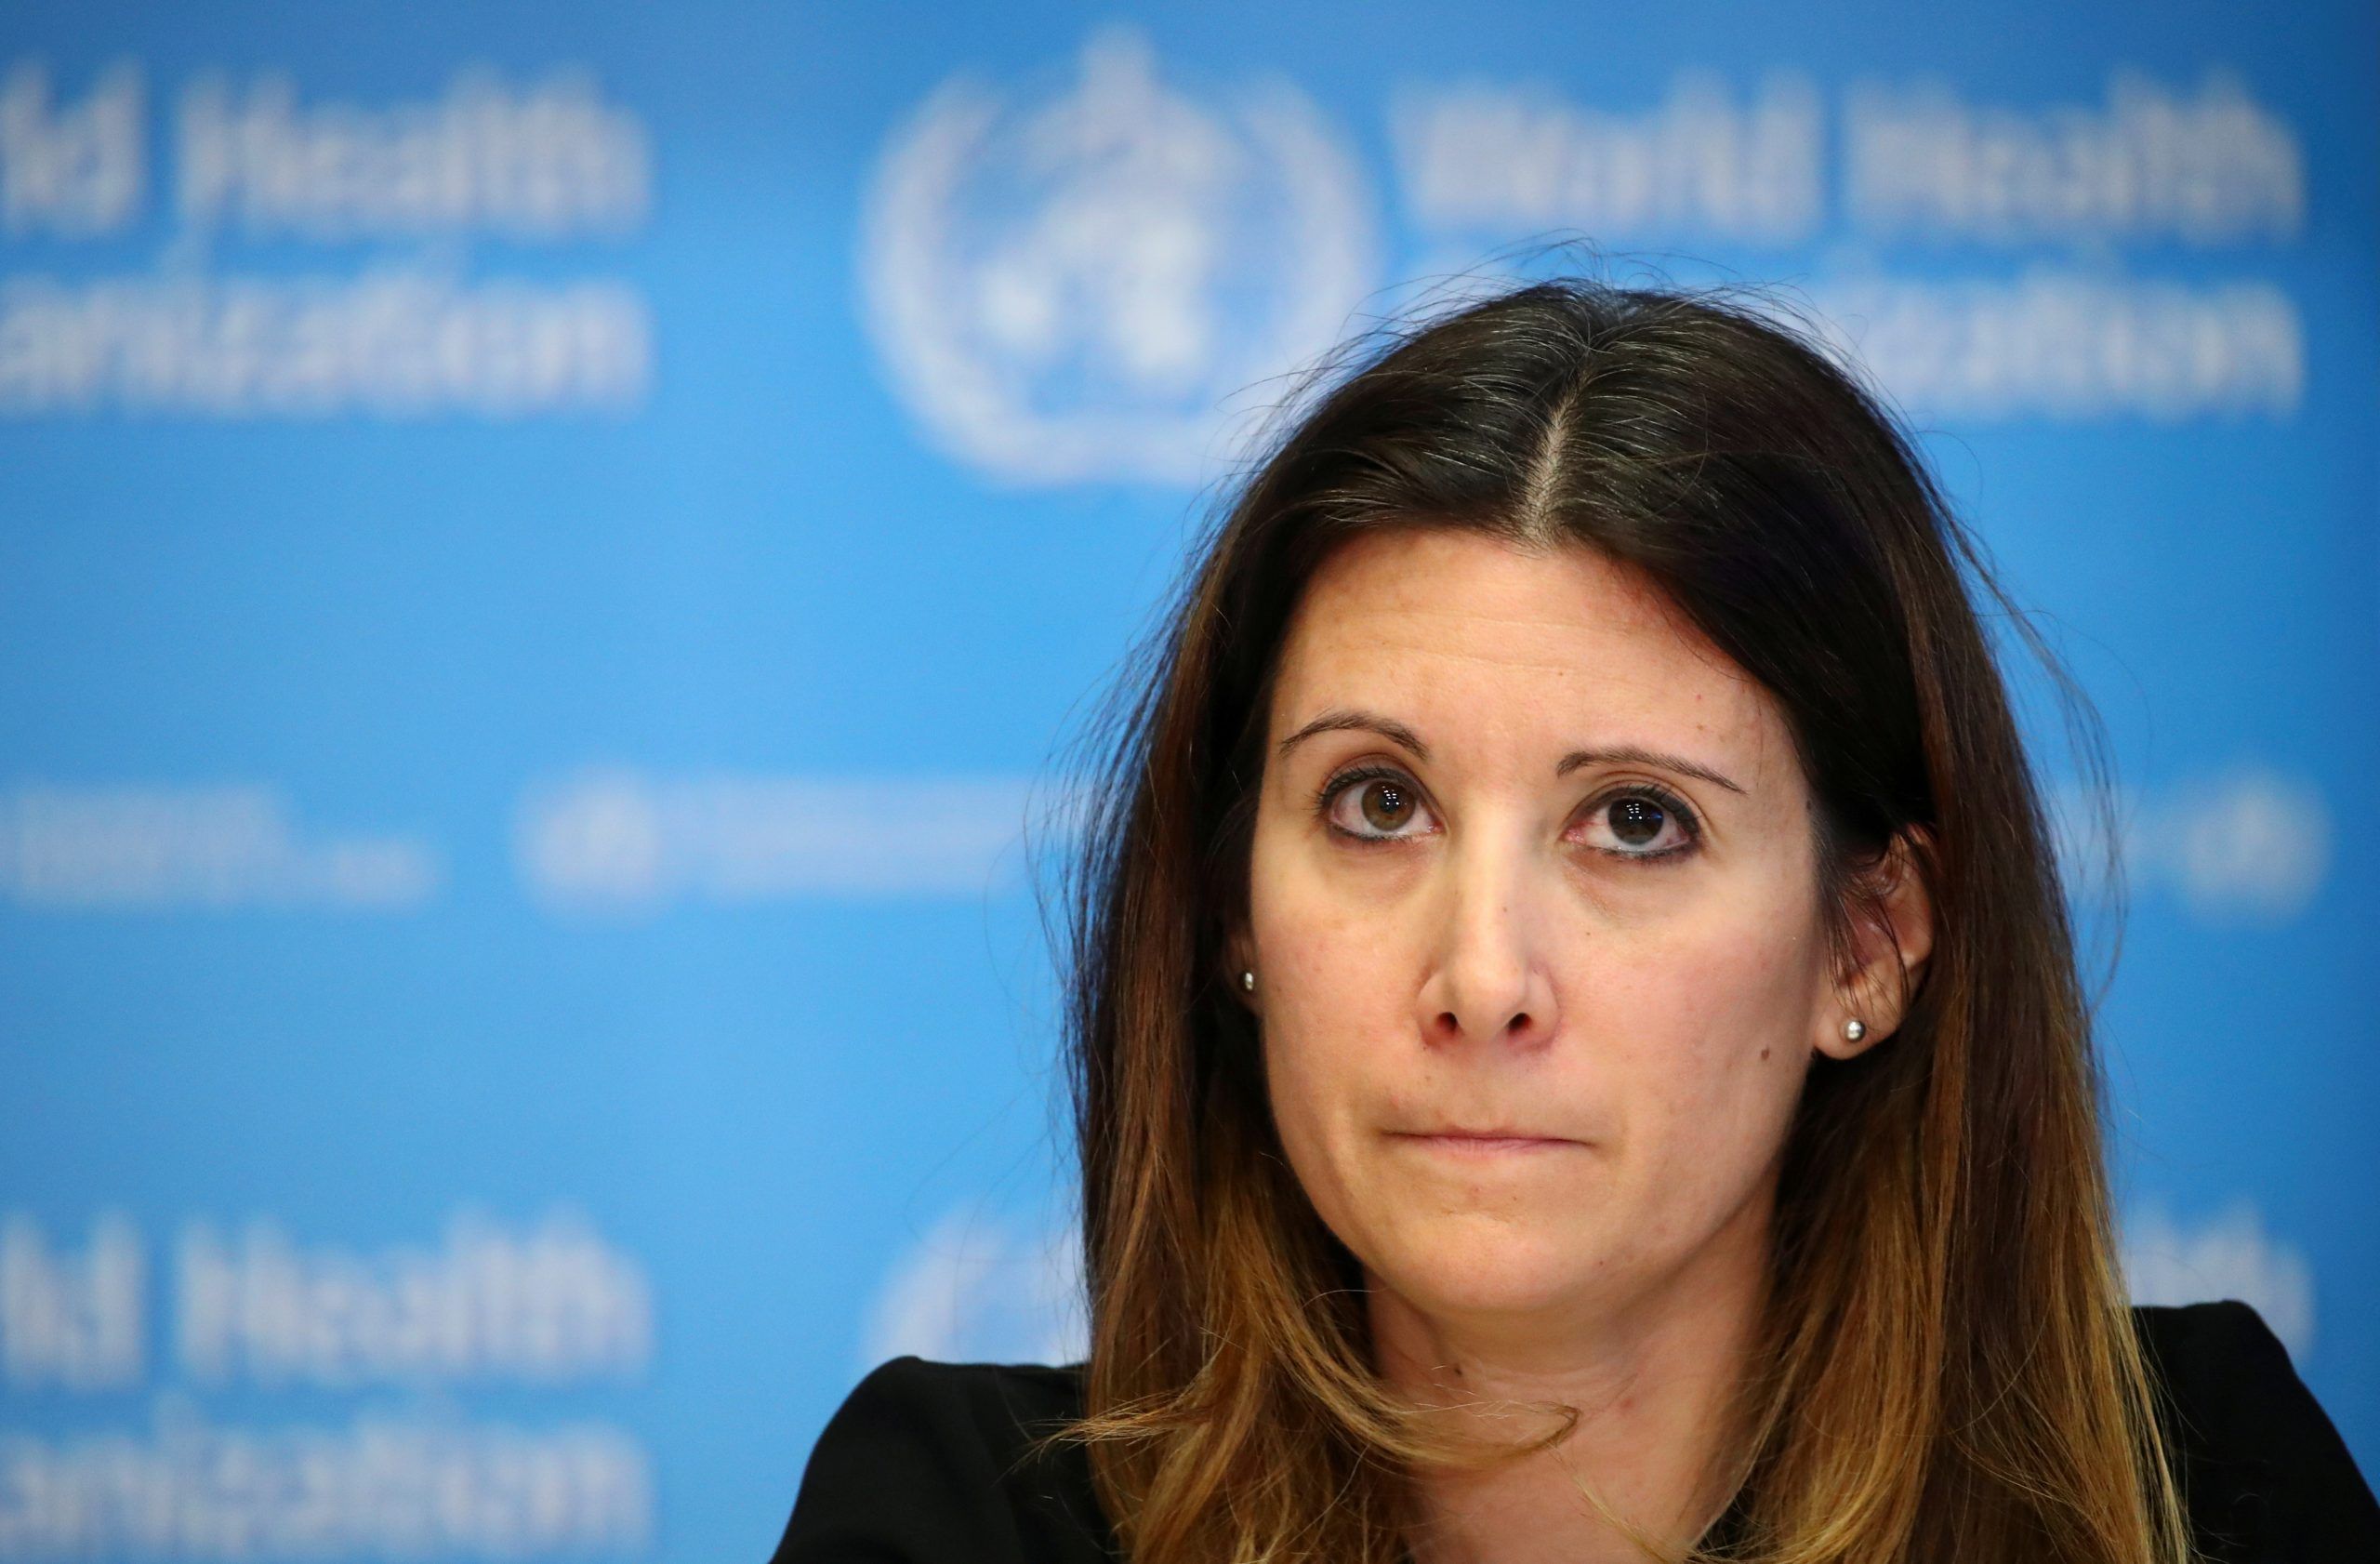 FILE PHOTO: Technical Lead for the World Health Organization (WHO) Maria Van Kerkhove attends a news conference on the situation of the coronavirus (COVID-2019), in Geneva, Switzerland, February 28, 2020. REUTERS/Denis Balibouse/File Photo ORG XMIT: FW1